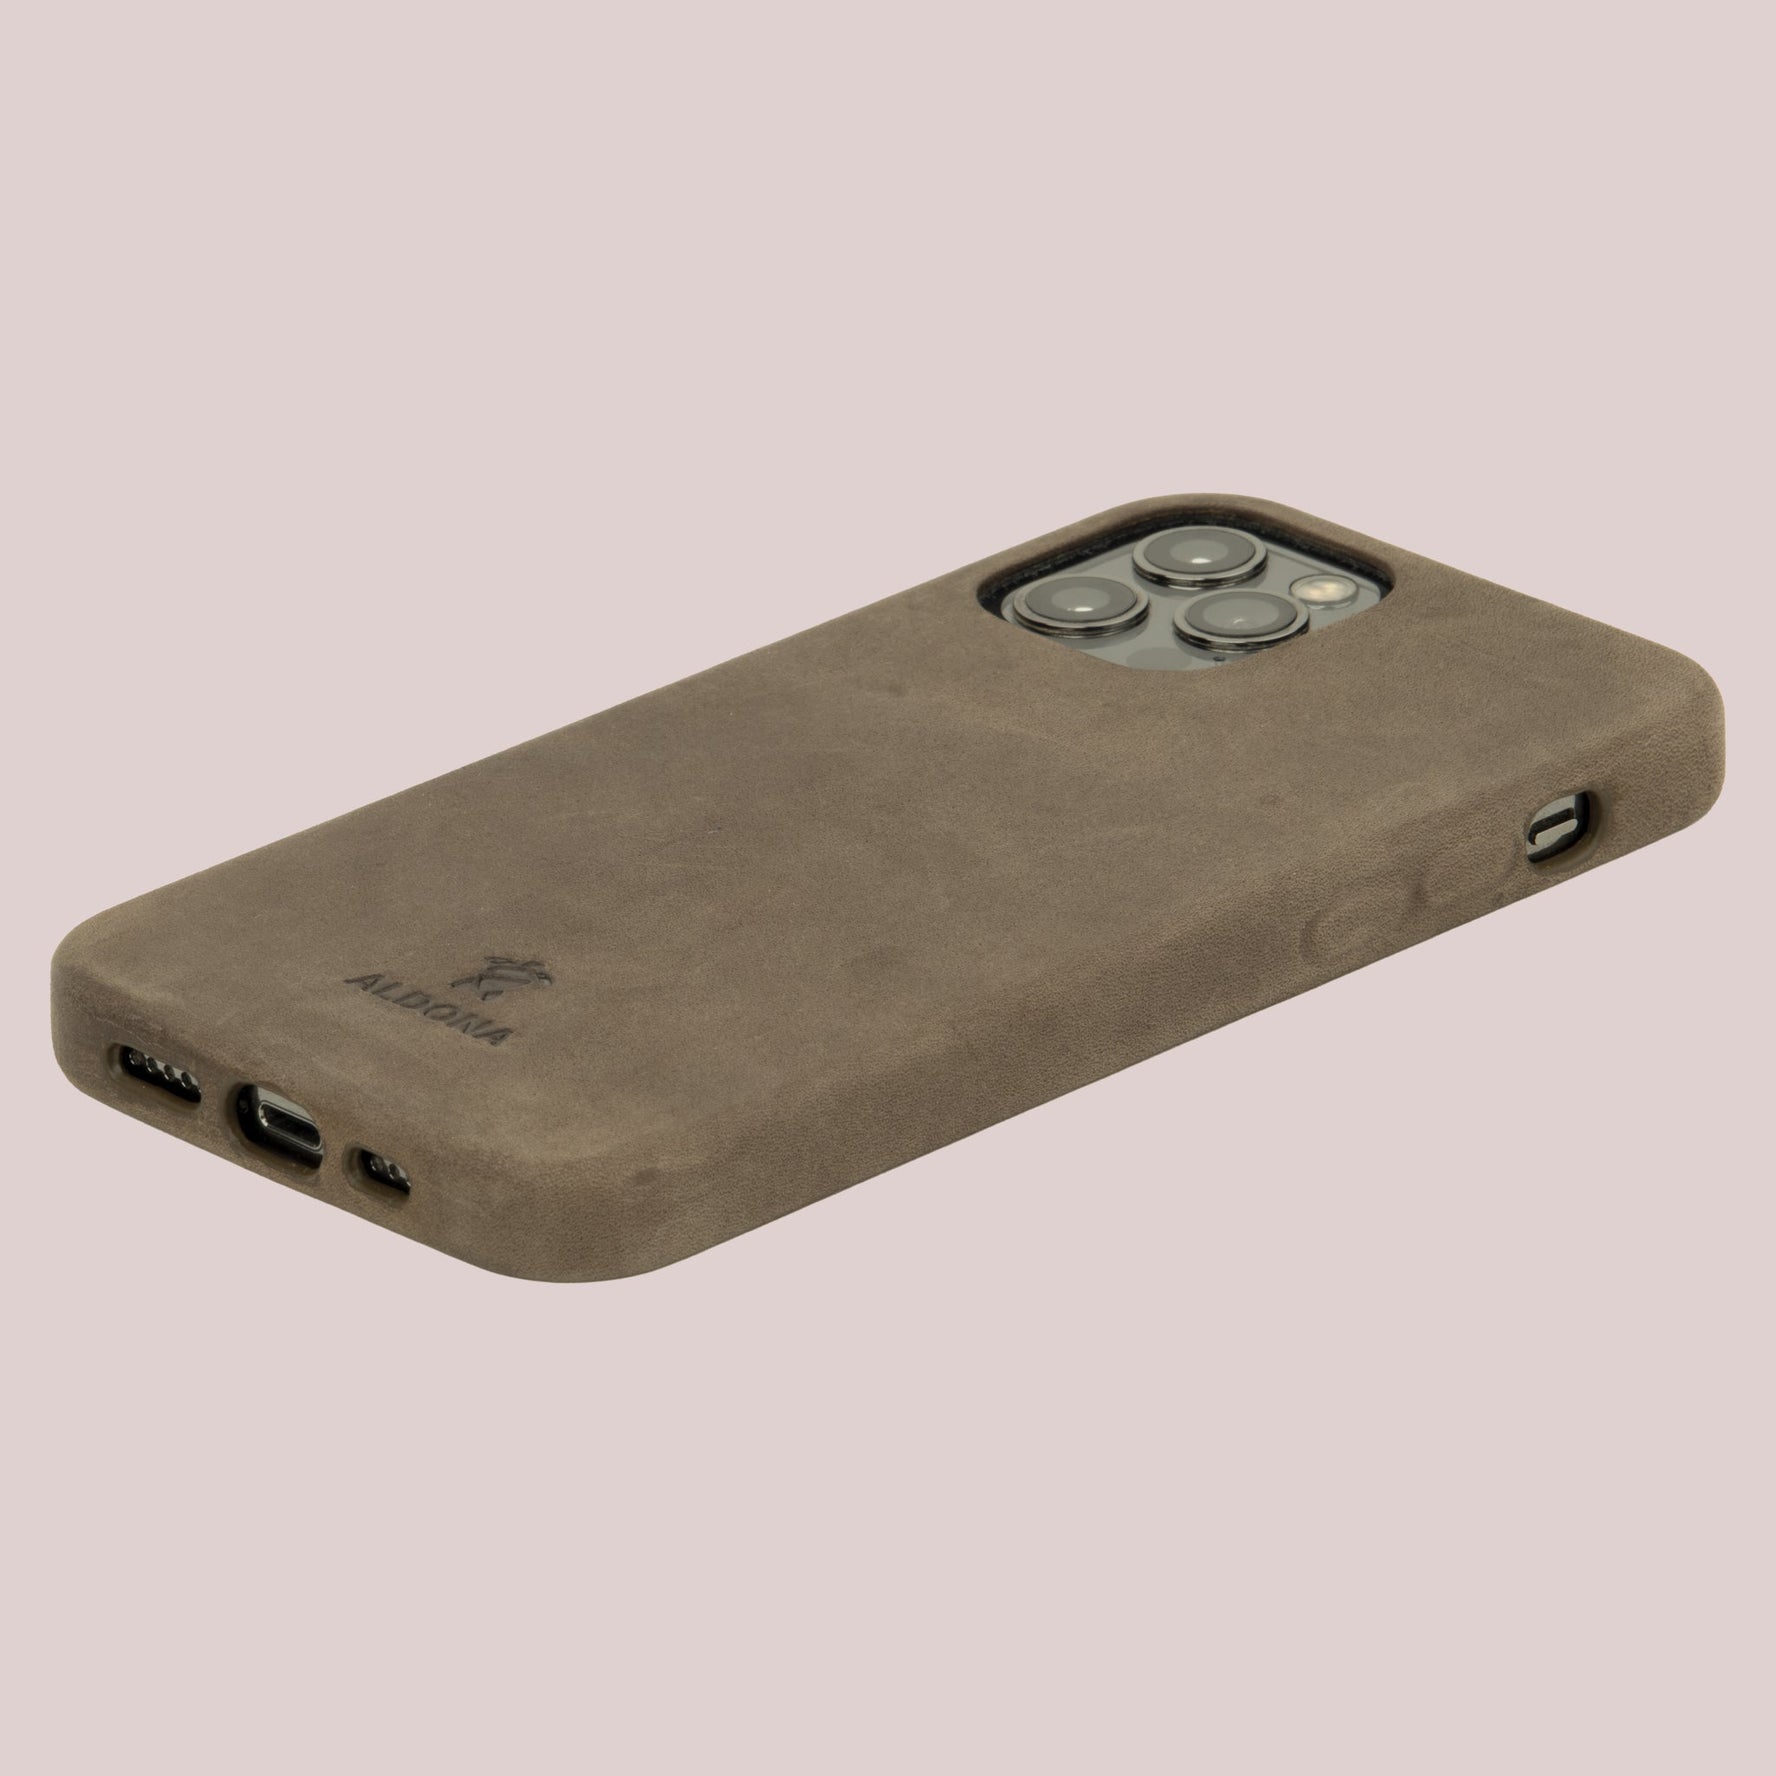 Kalon Case for iPhone 12 Pro Max with MagSafe Compatibility - Burnt Tobacco